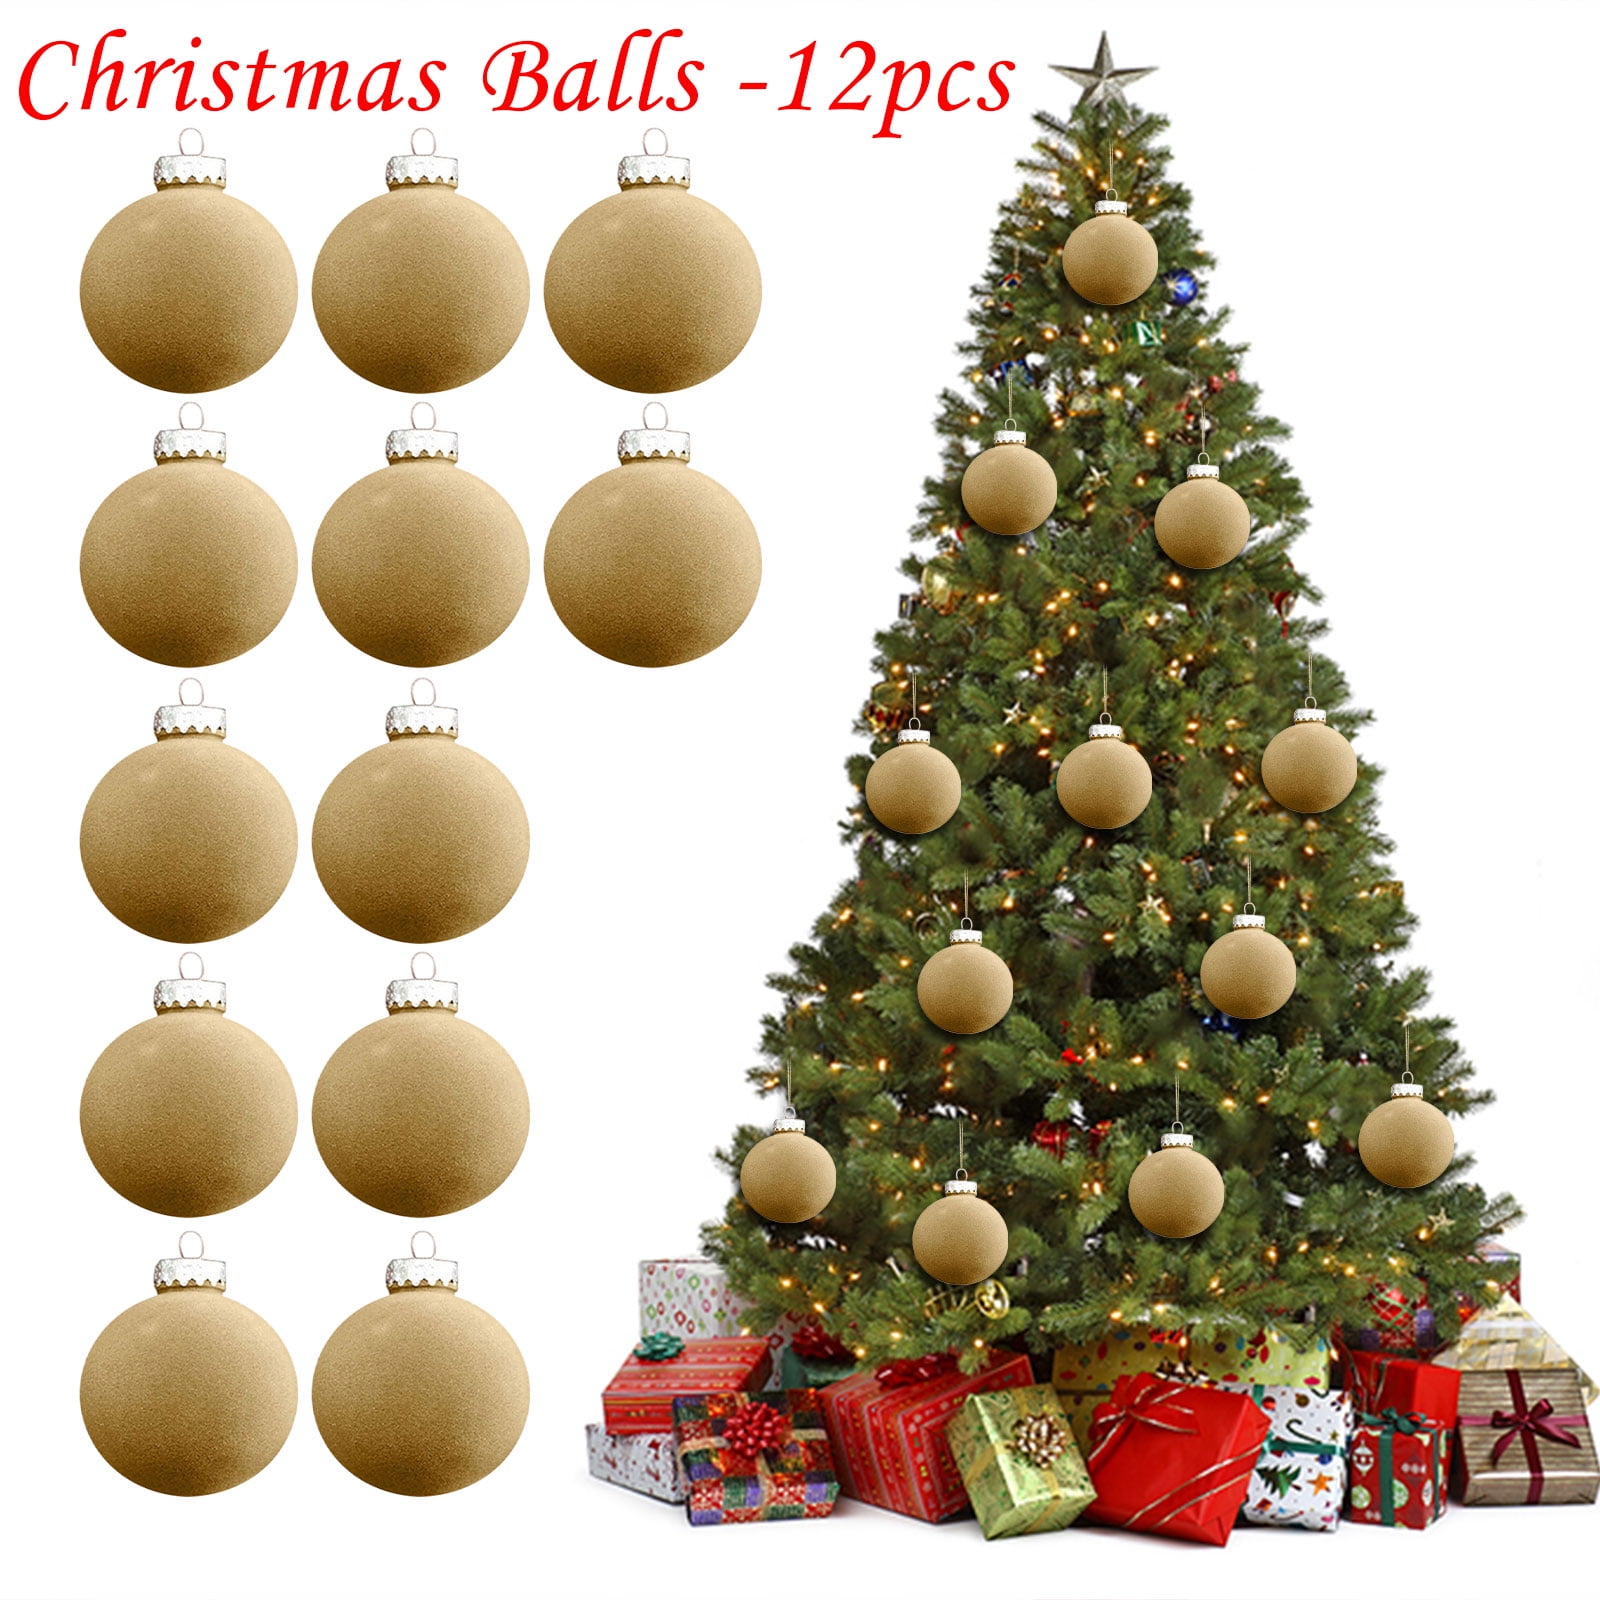 SDJMa 8 Pcs Velvet Christmas Balls Ornaments, Flocked Christmas Tree Ball  with Hanging Loop, Decorative Xmas Tree Decoration for Home Holiday Party